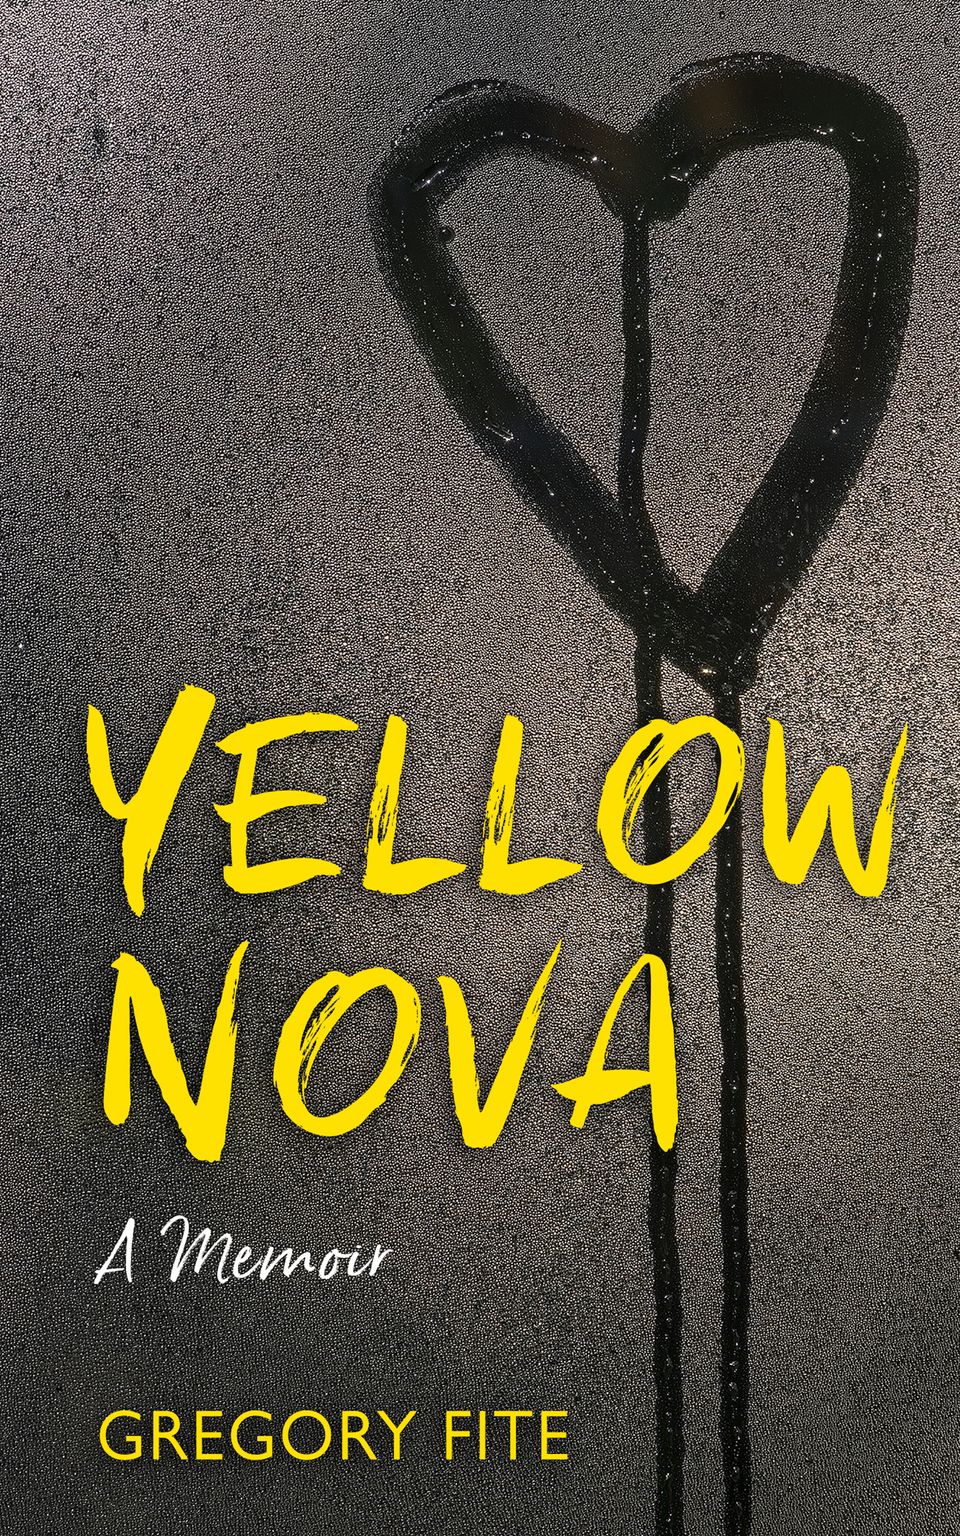 Yellow nover final cover revised 8 26 23